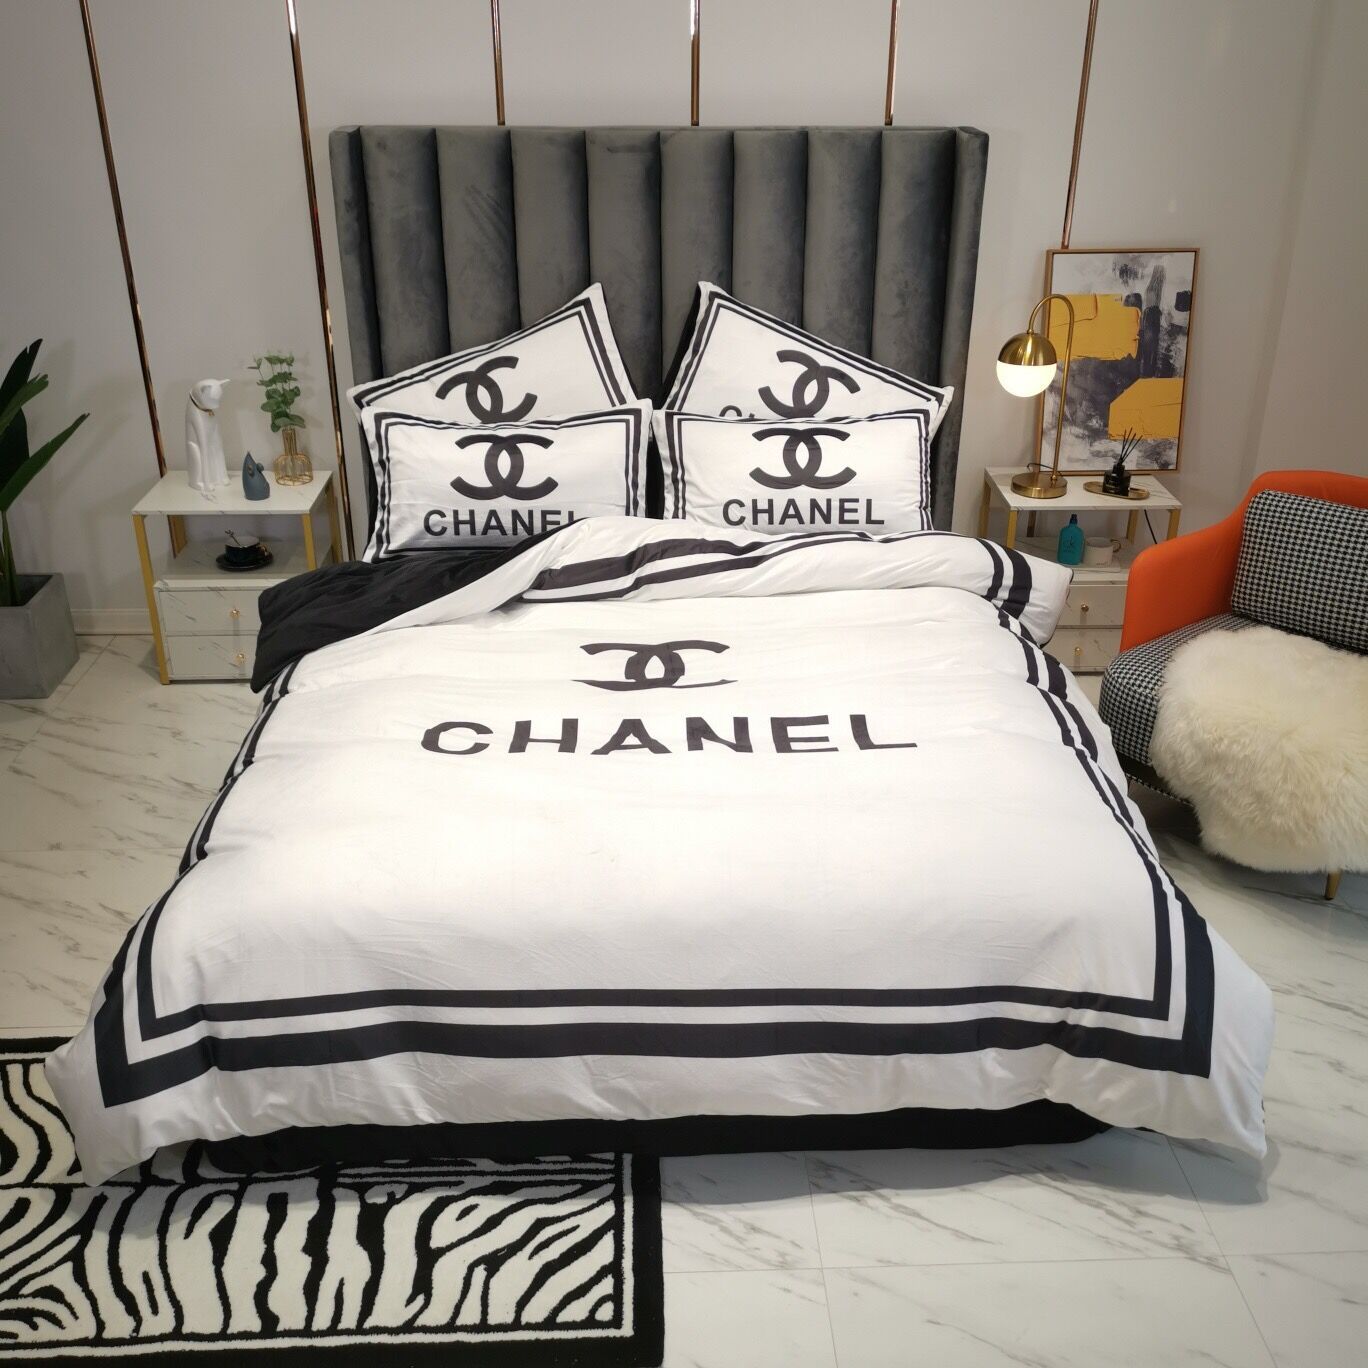 Hot Sale Designer Bedding Sets White Luxury Queen Size Bedding Sheet Cover Hot Sale Pillow Cases ...